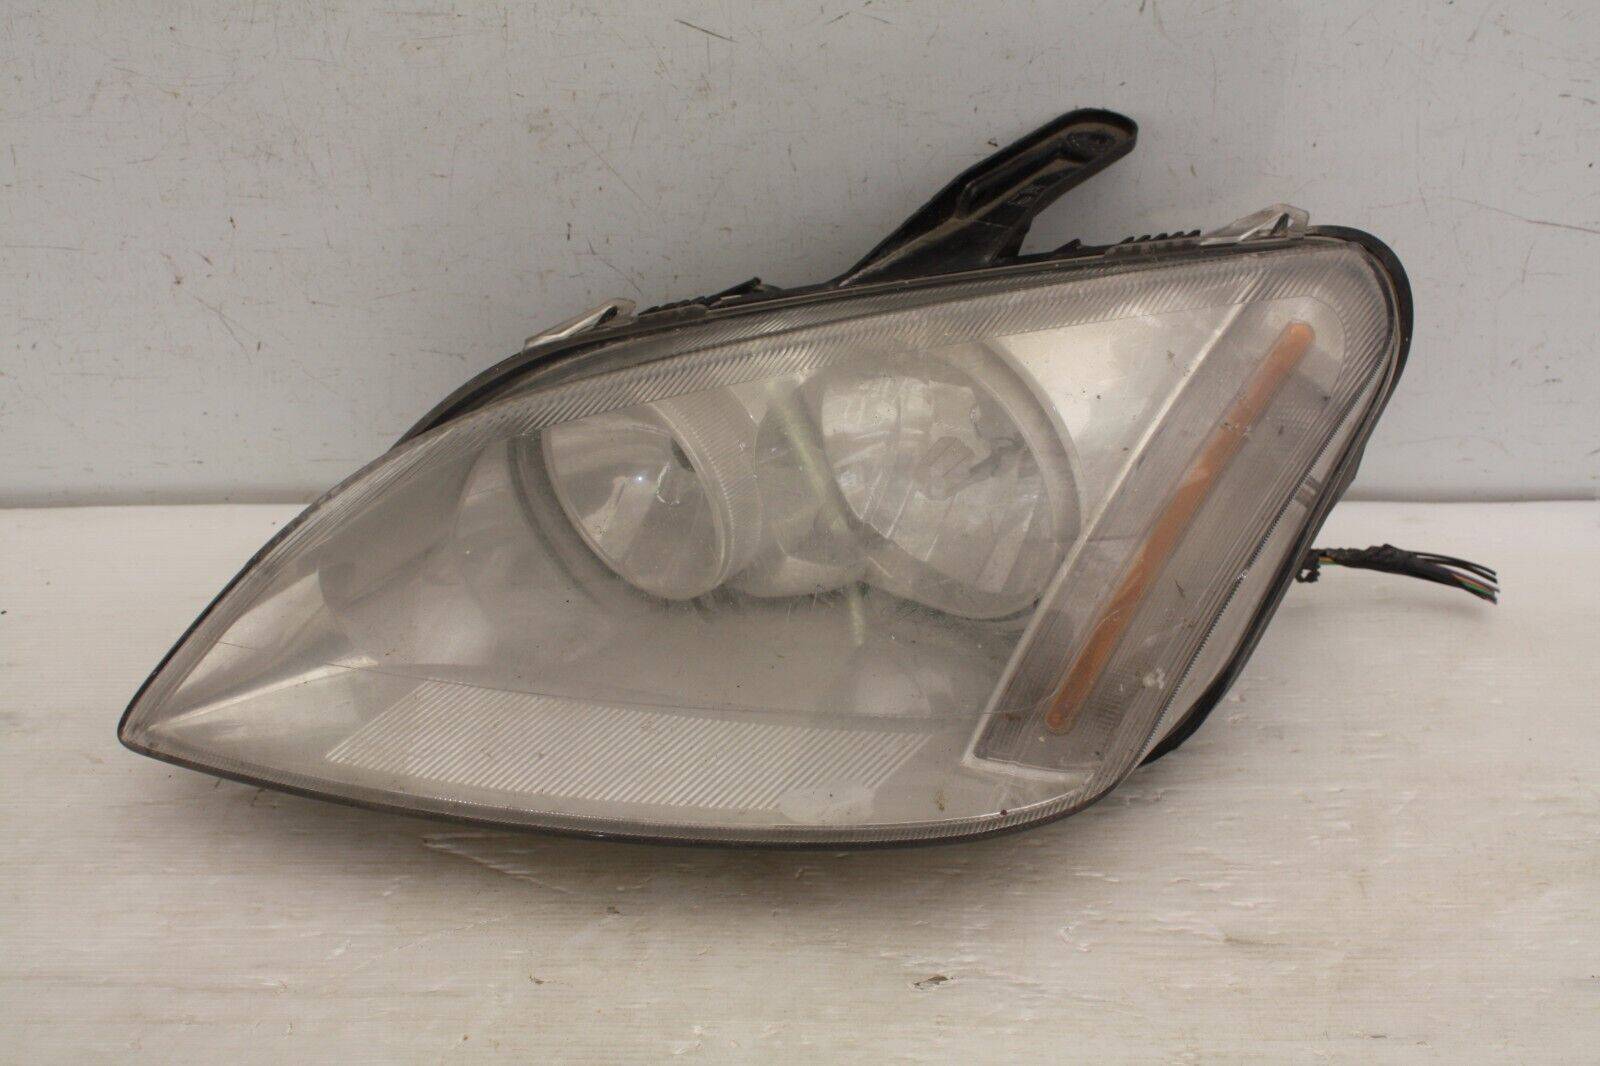 Ford-C-Max-Left-Side-Headlight-2004-to-2007-3M51-13006-BH-Genuine-175712182057